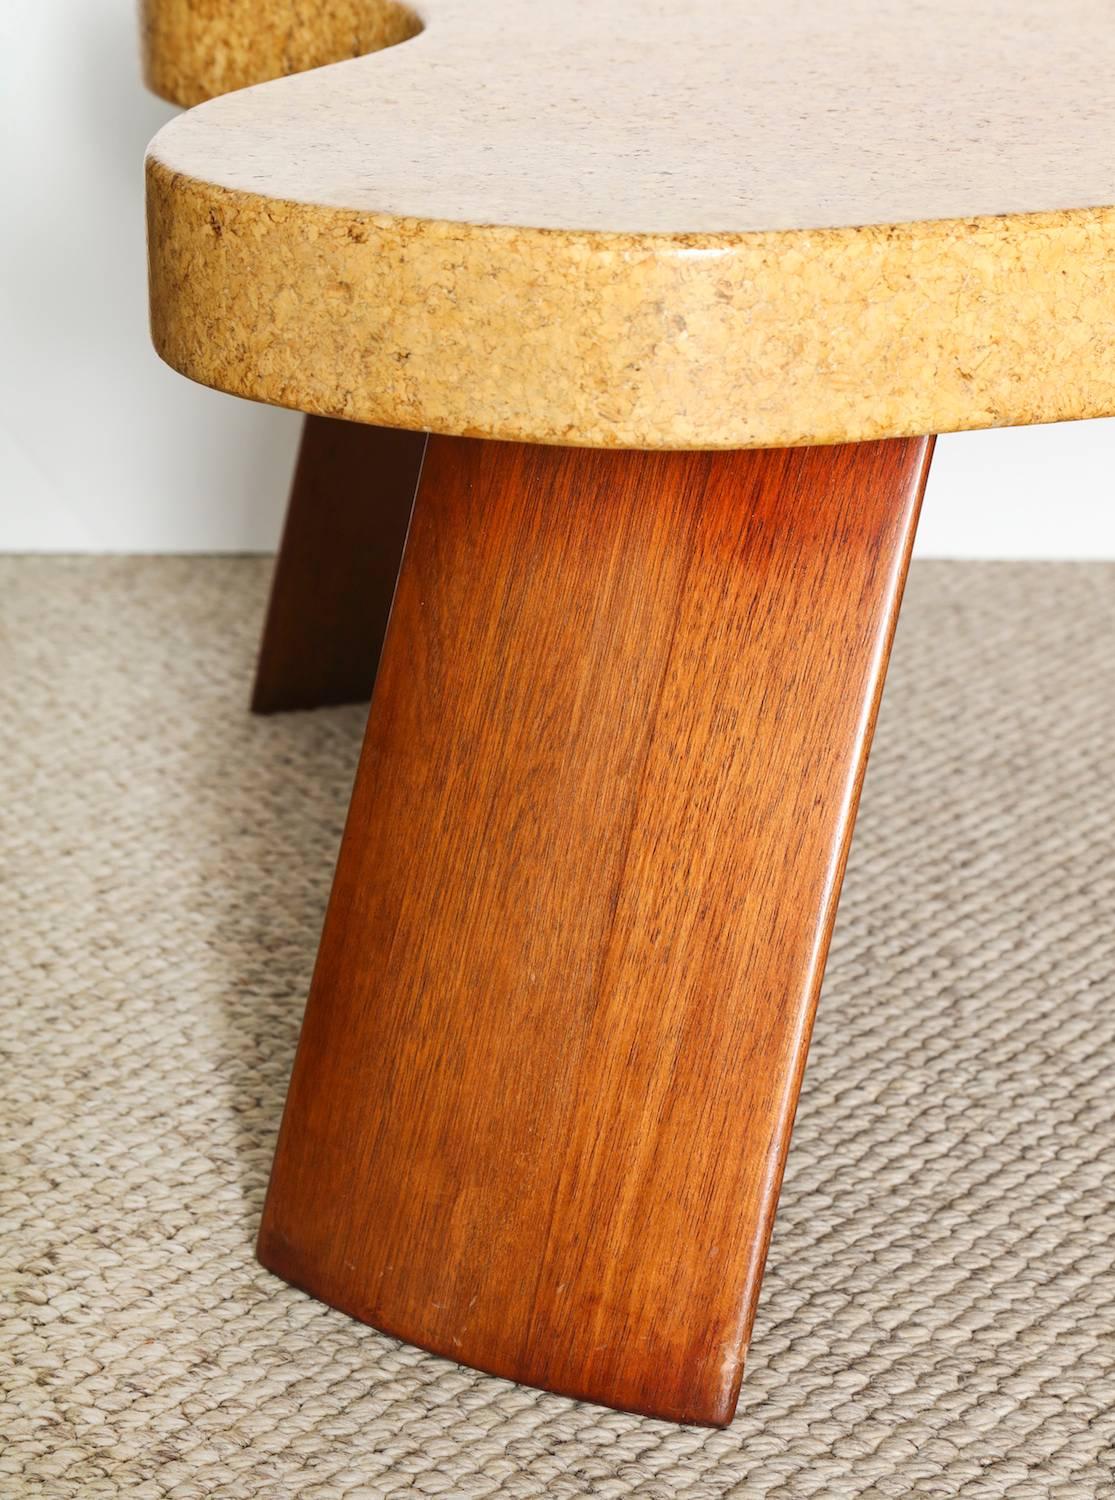 Amorphic Cocktail Table by Paul Frankl. Great form with a cork-wrapped amorphic top and four fin-shaped mahogany legs. The top has a natural cork finish with a few discolorations. Produced by Johnson Furniture Company.